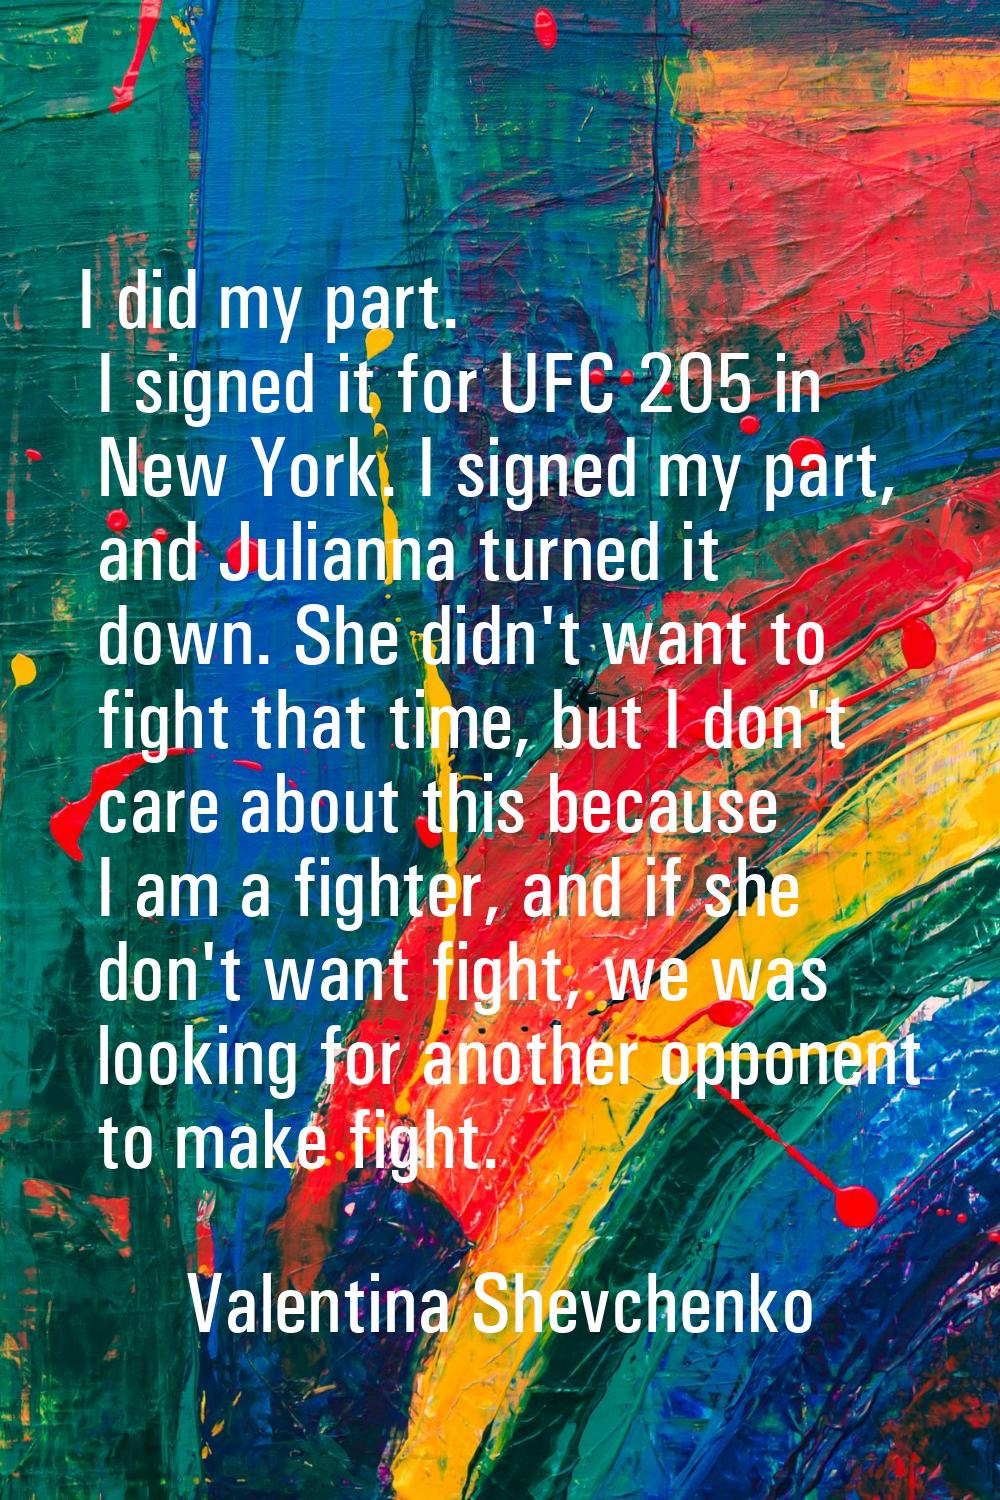 I did my part. I signed it for UFC 205 in New York. I signed my part, and Julianna turned it down. 